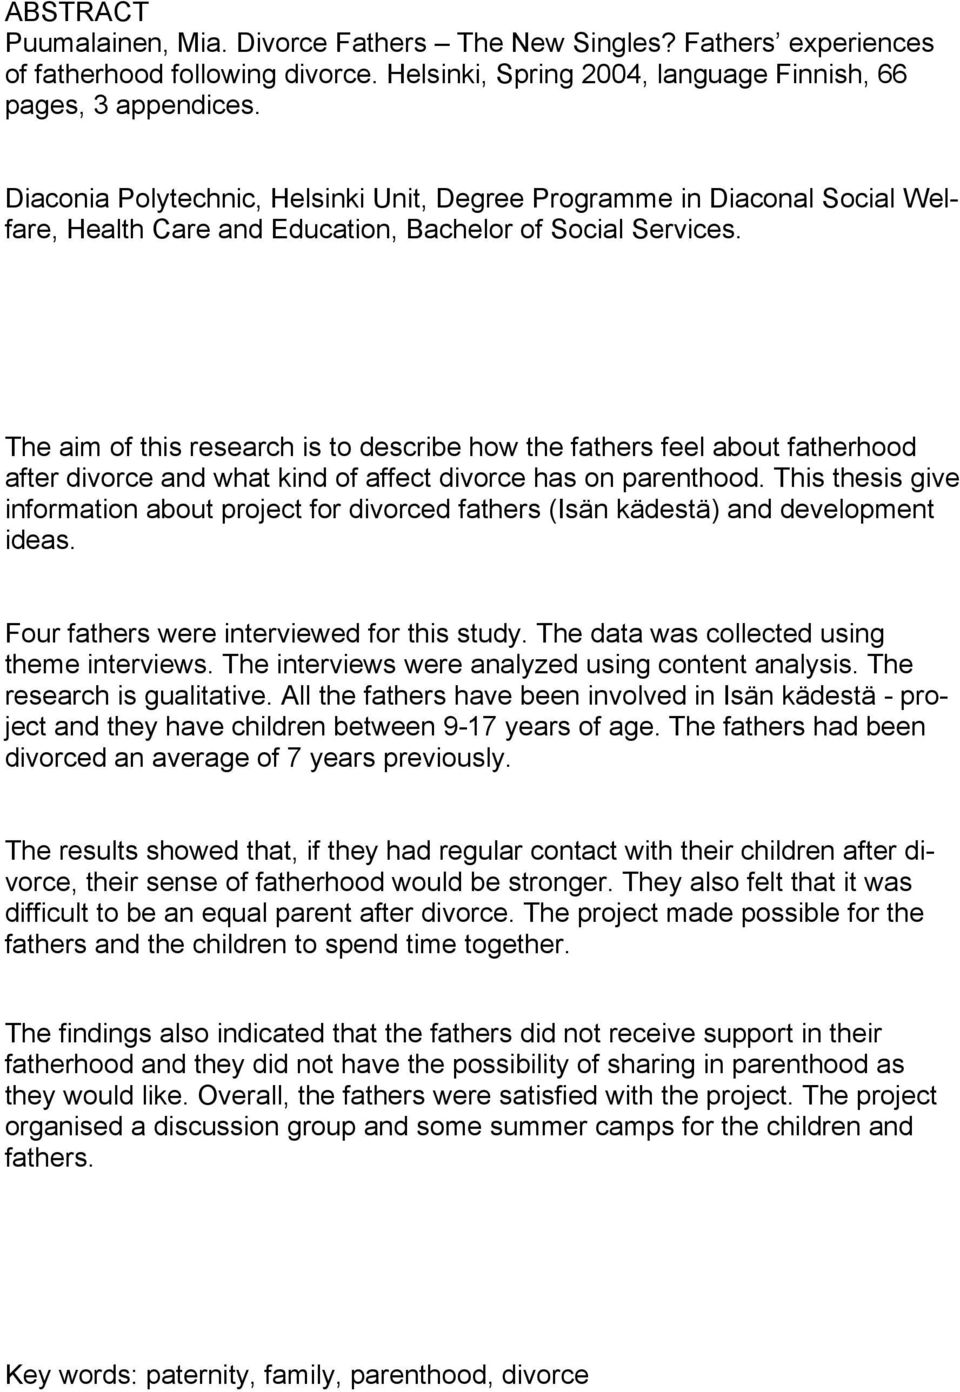 The aim of this research is to describe how the fathers feel about fatherhood after divorce and what kind of affect divorce has on parenthood.